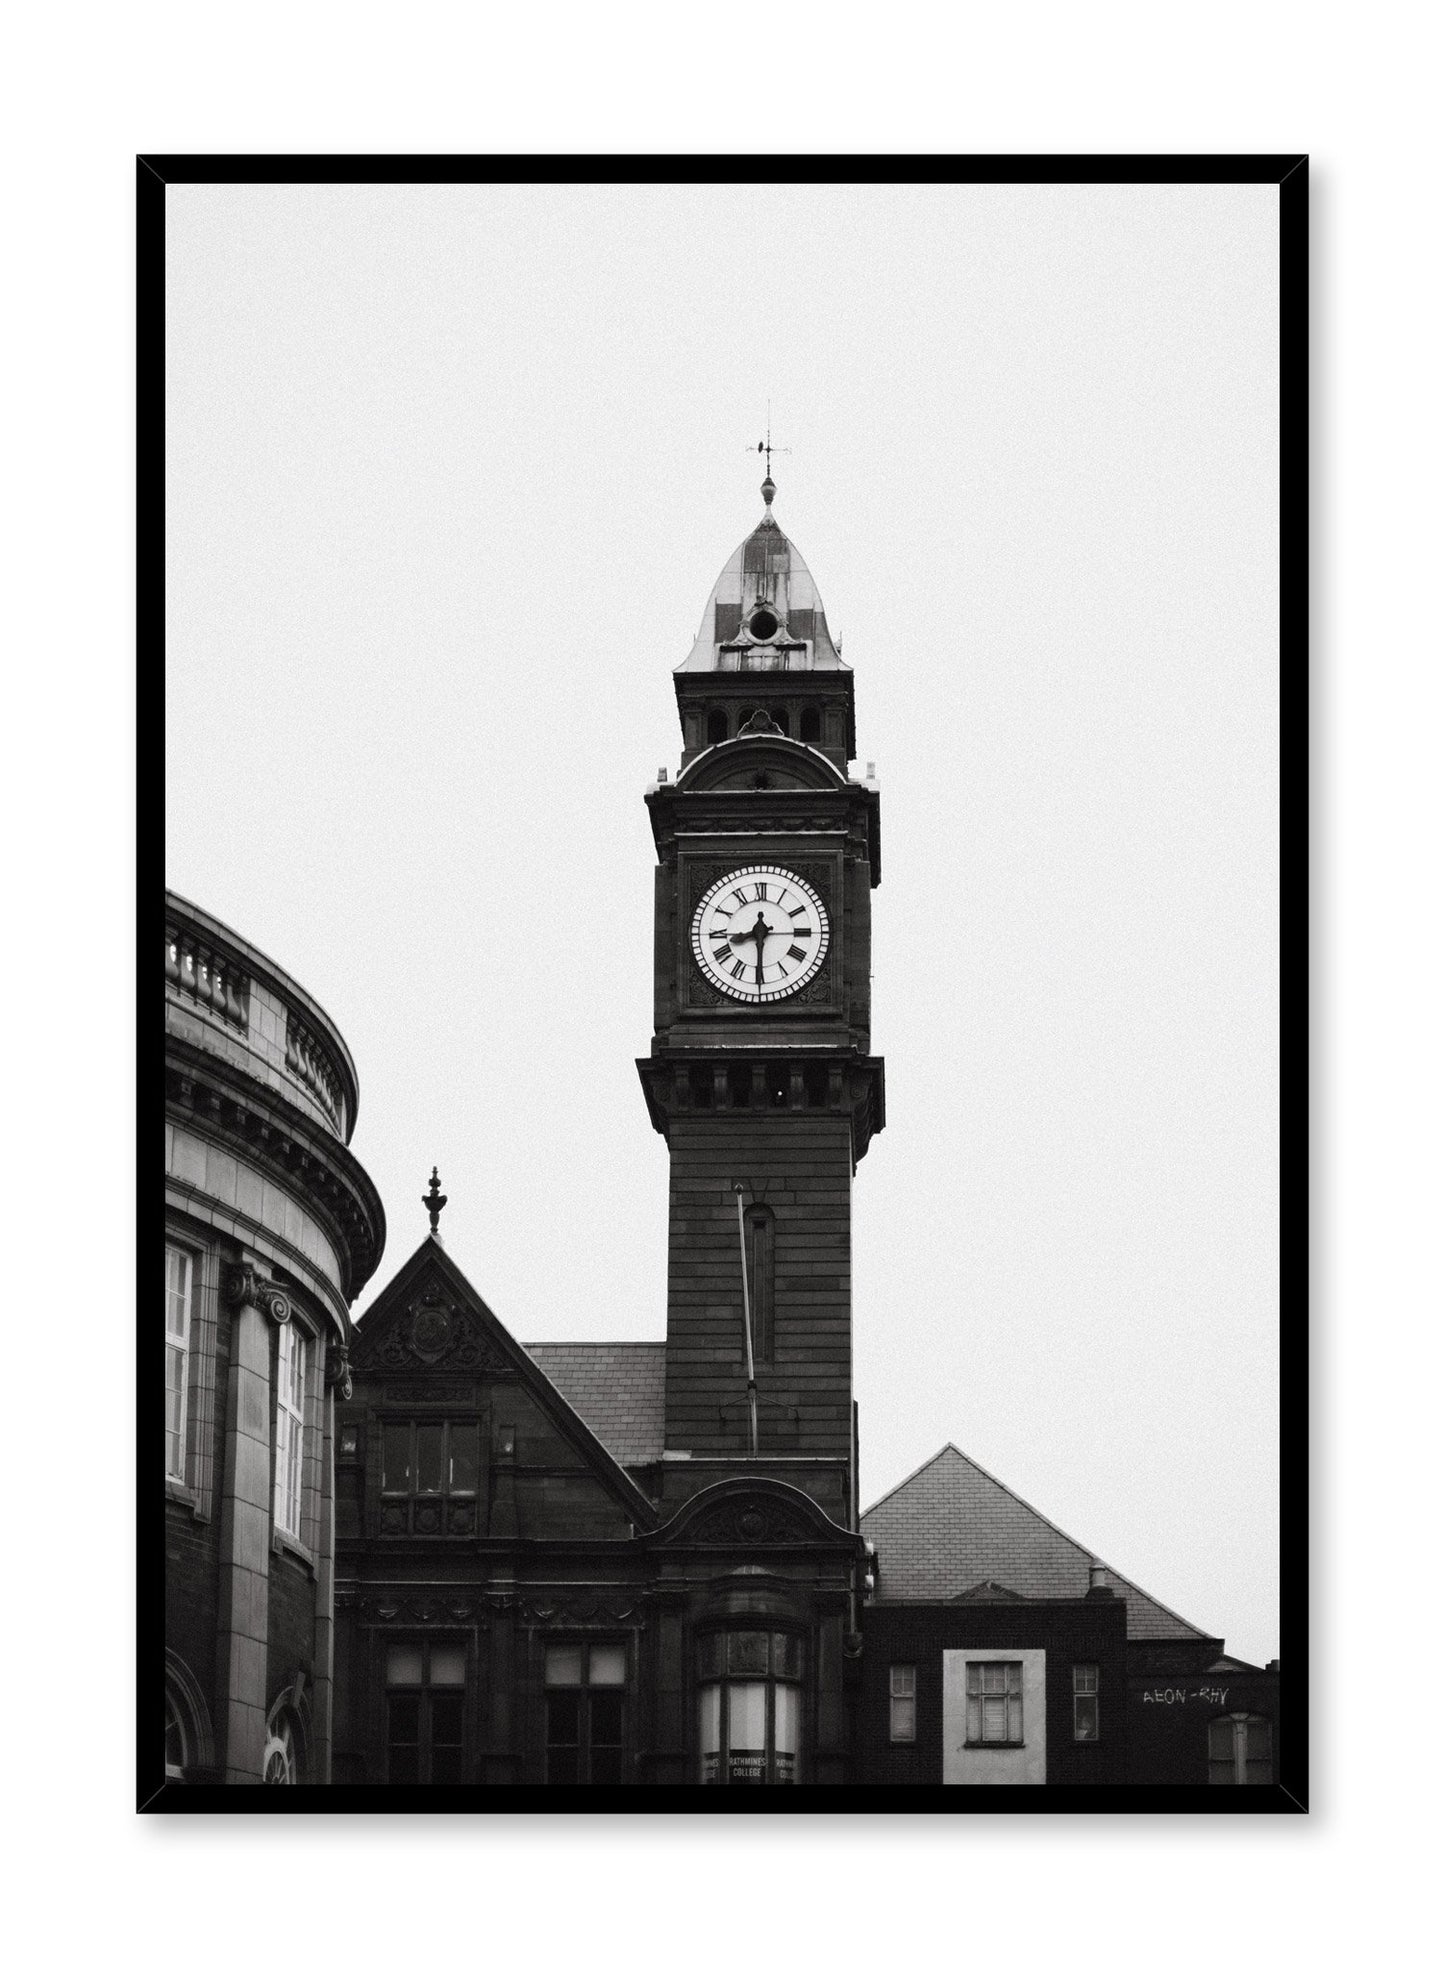 Modern minimalist poster by Opposite Wall with black and white photography of Clock Tower in Edinburgh, Scotland